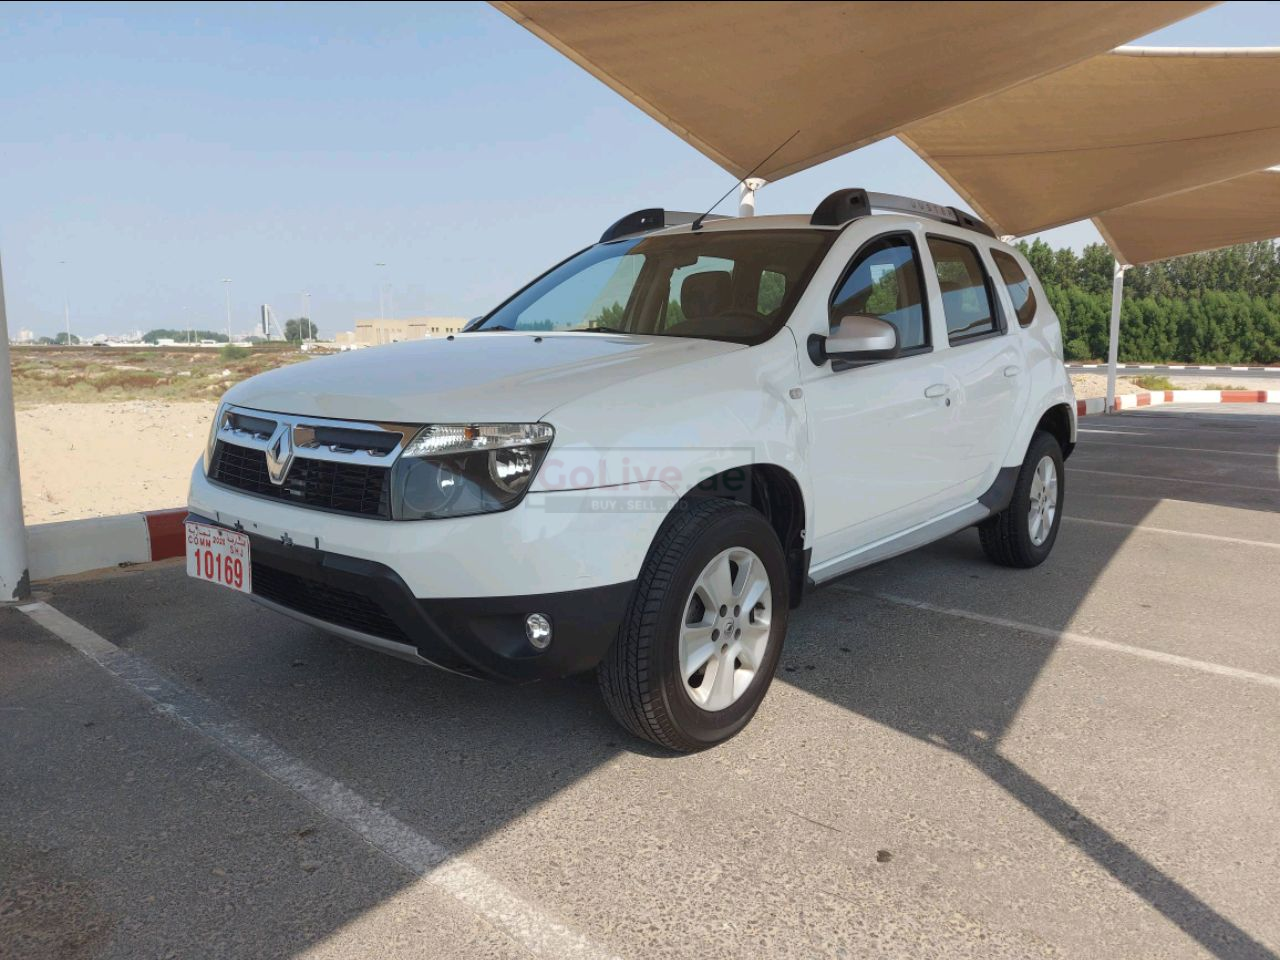 Renault Duster 2015 AED 18,000, Good condition, Warranty, Negotiable